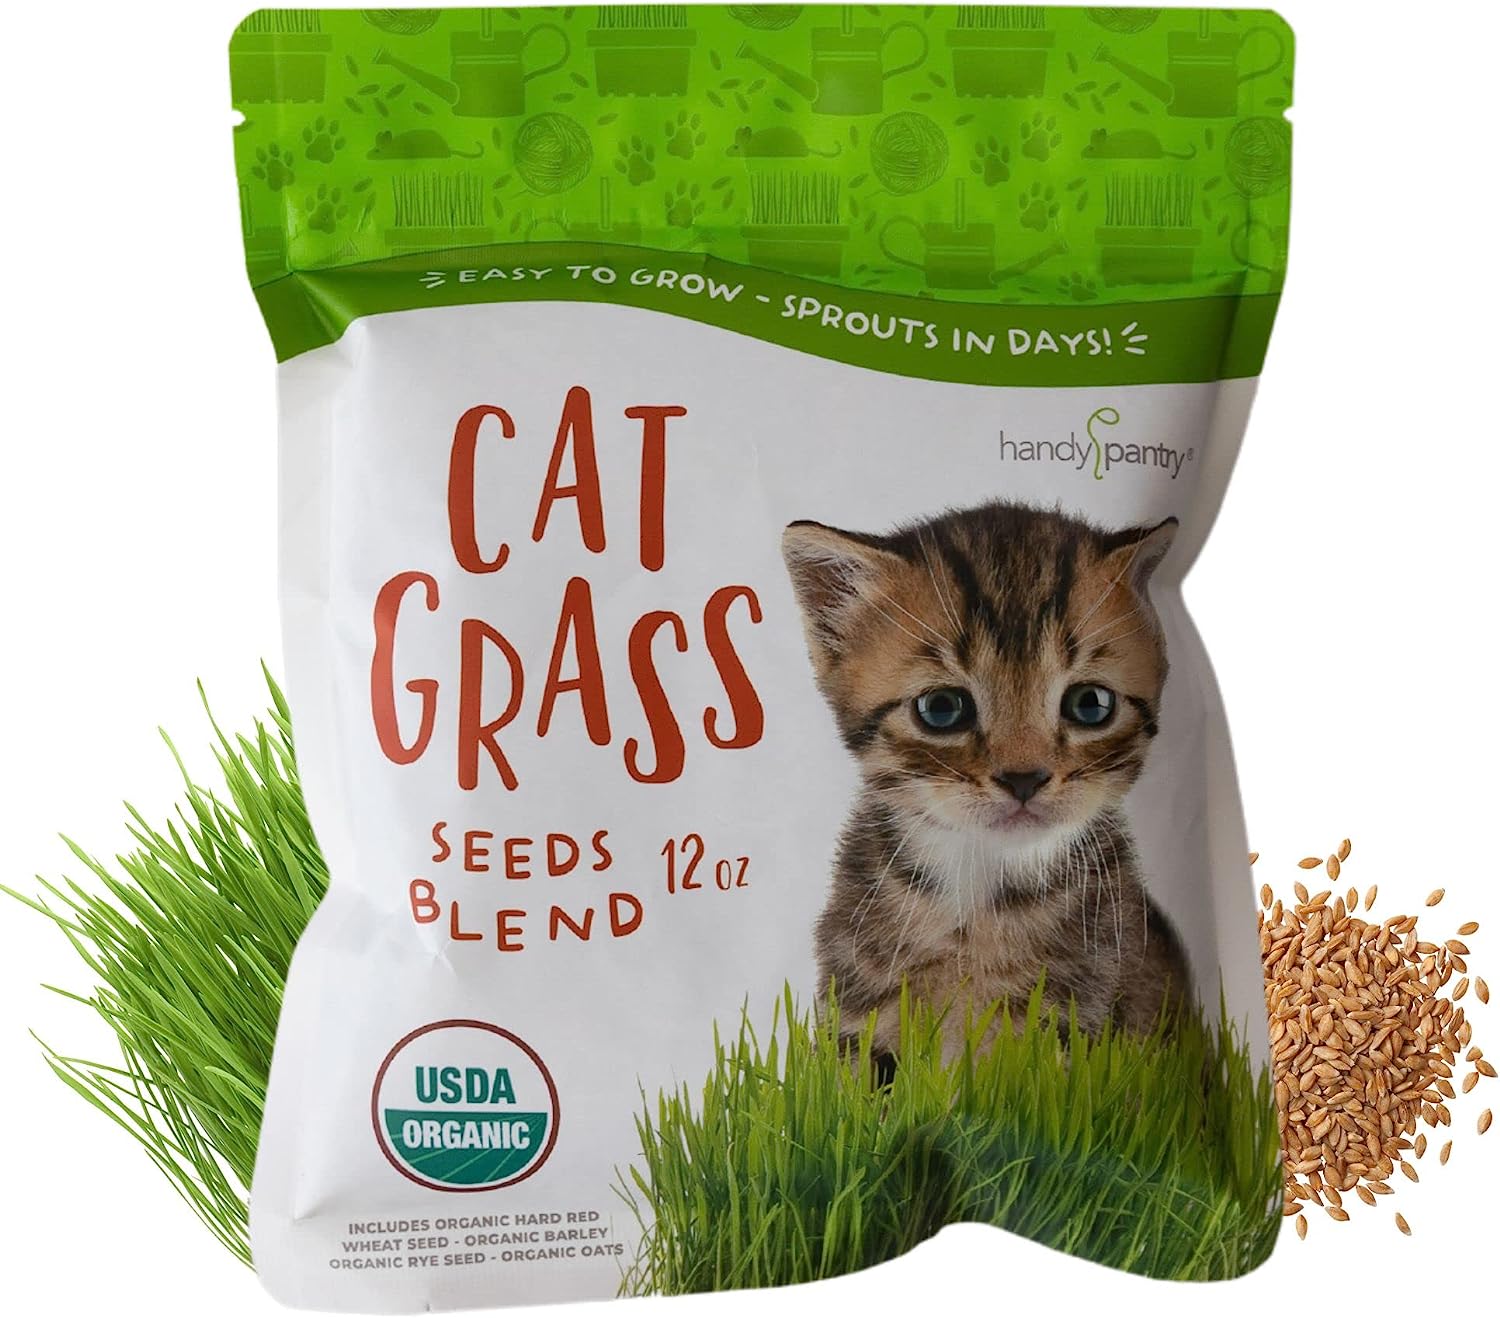 Handy Pantry Organic Cat Grass Seed Blend for Planting